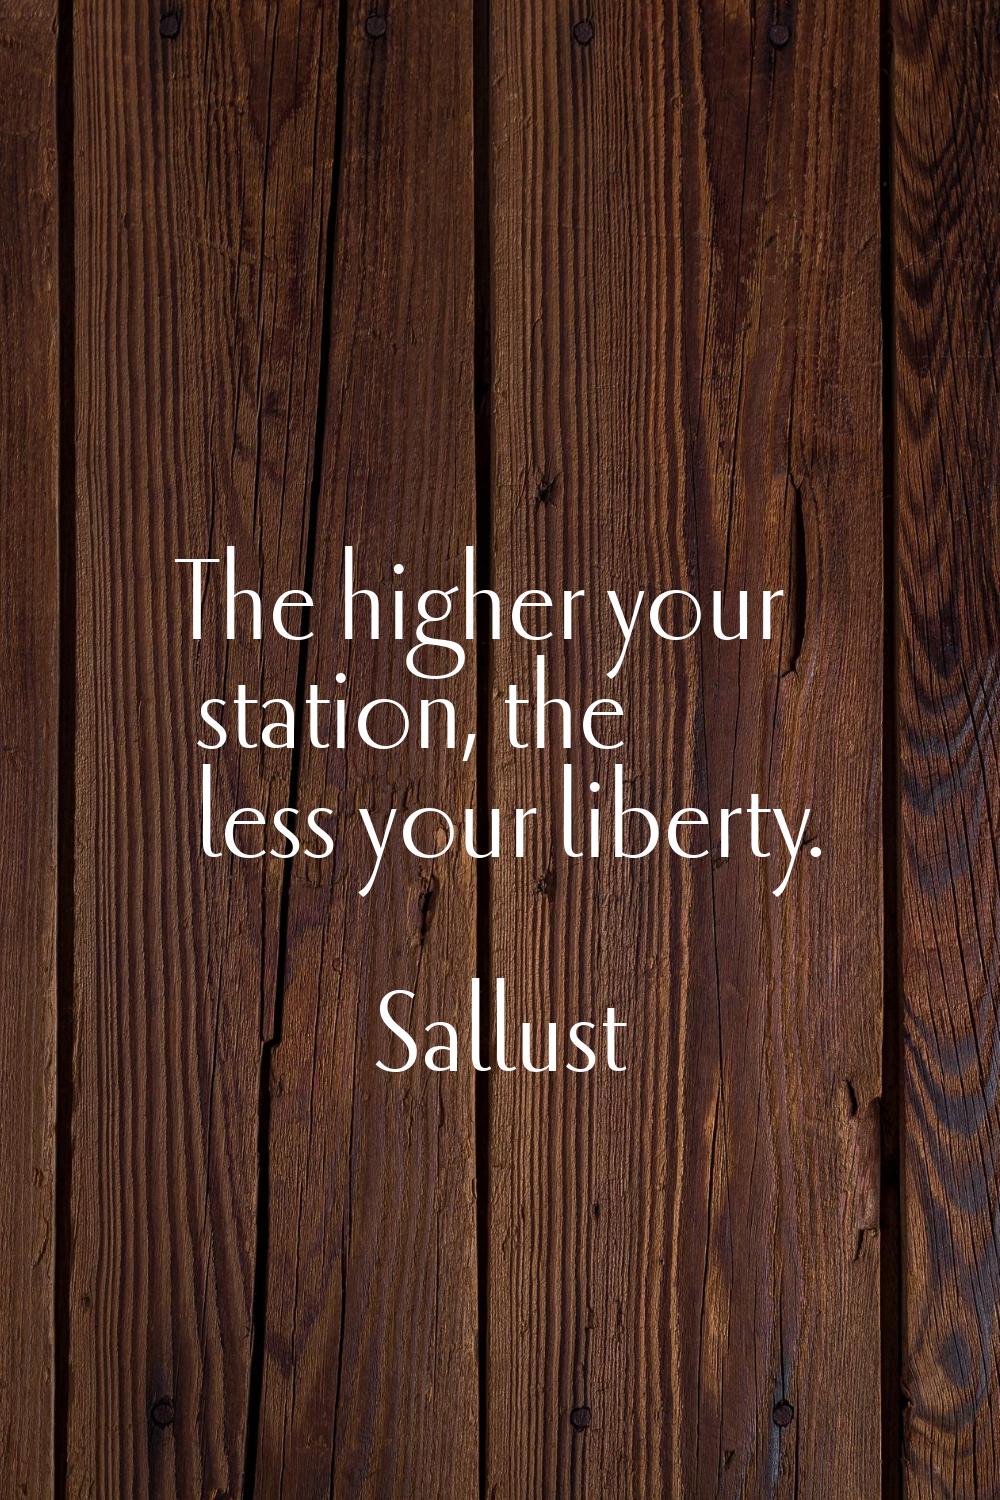 The higher your station, the less your liberty.